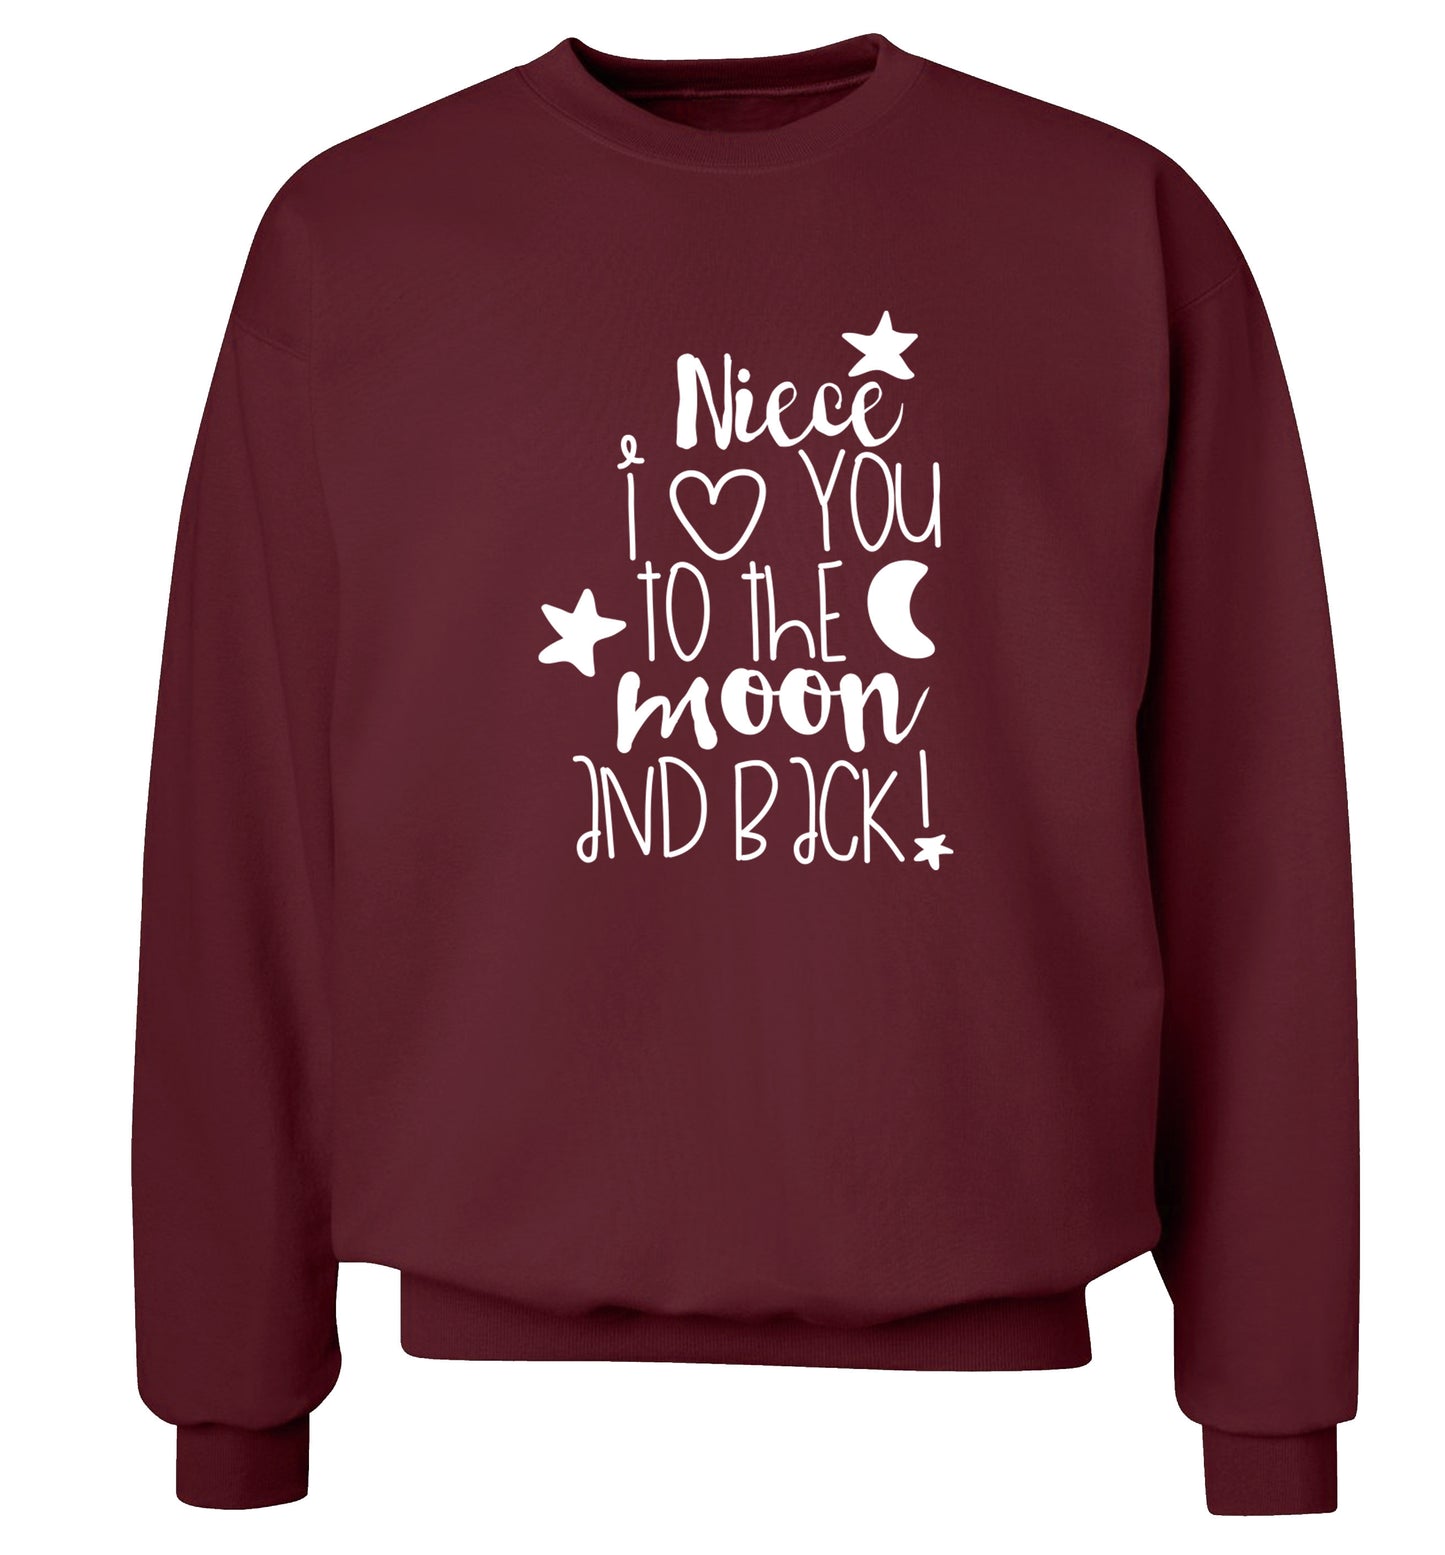 Niece I love you to the moon and back Adult's unisex maroon  sweater 2XL